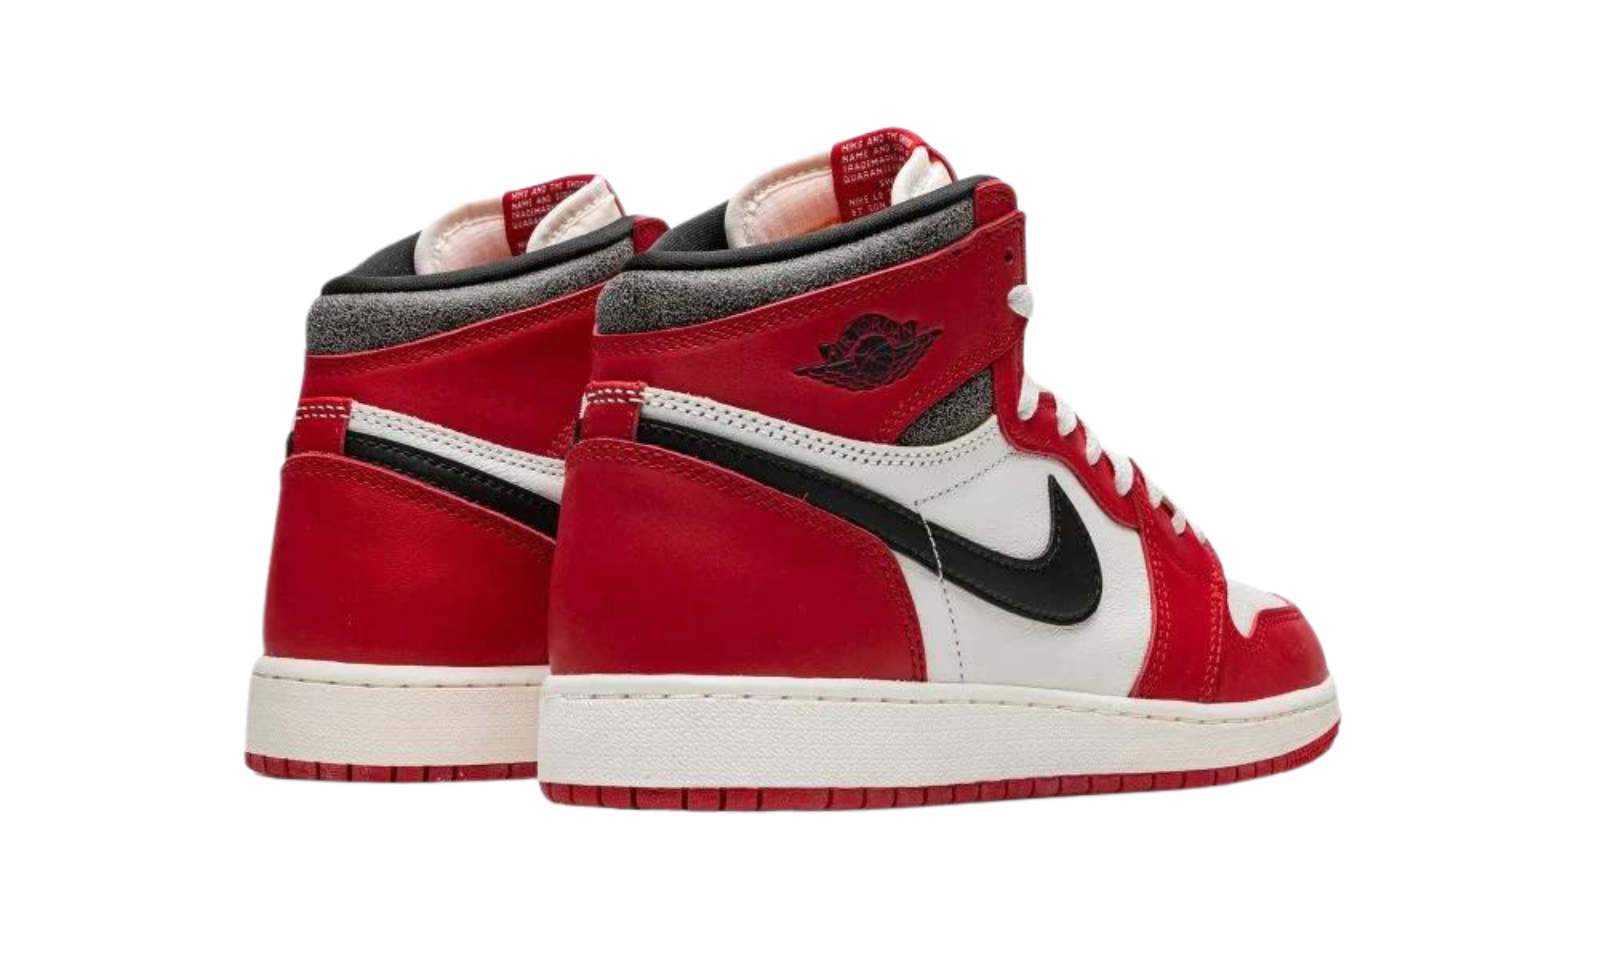 Air Jordan 1 High Chicago Lost and Founds